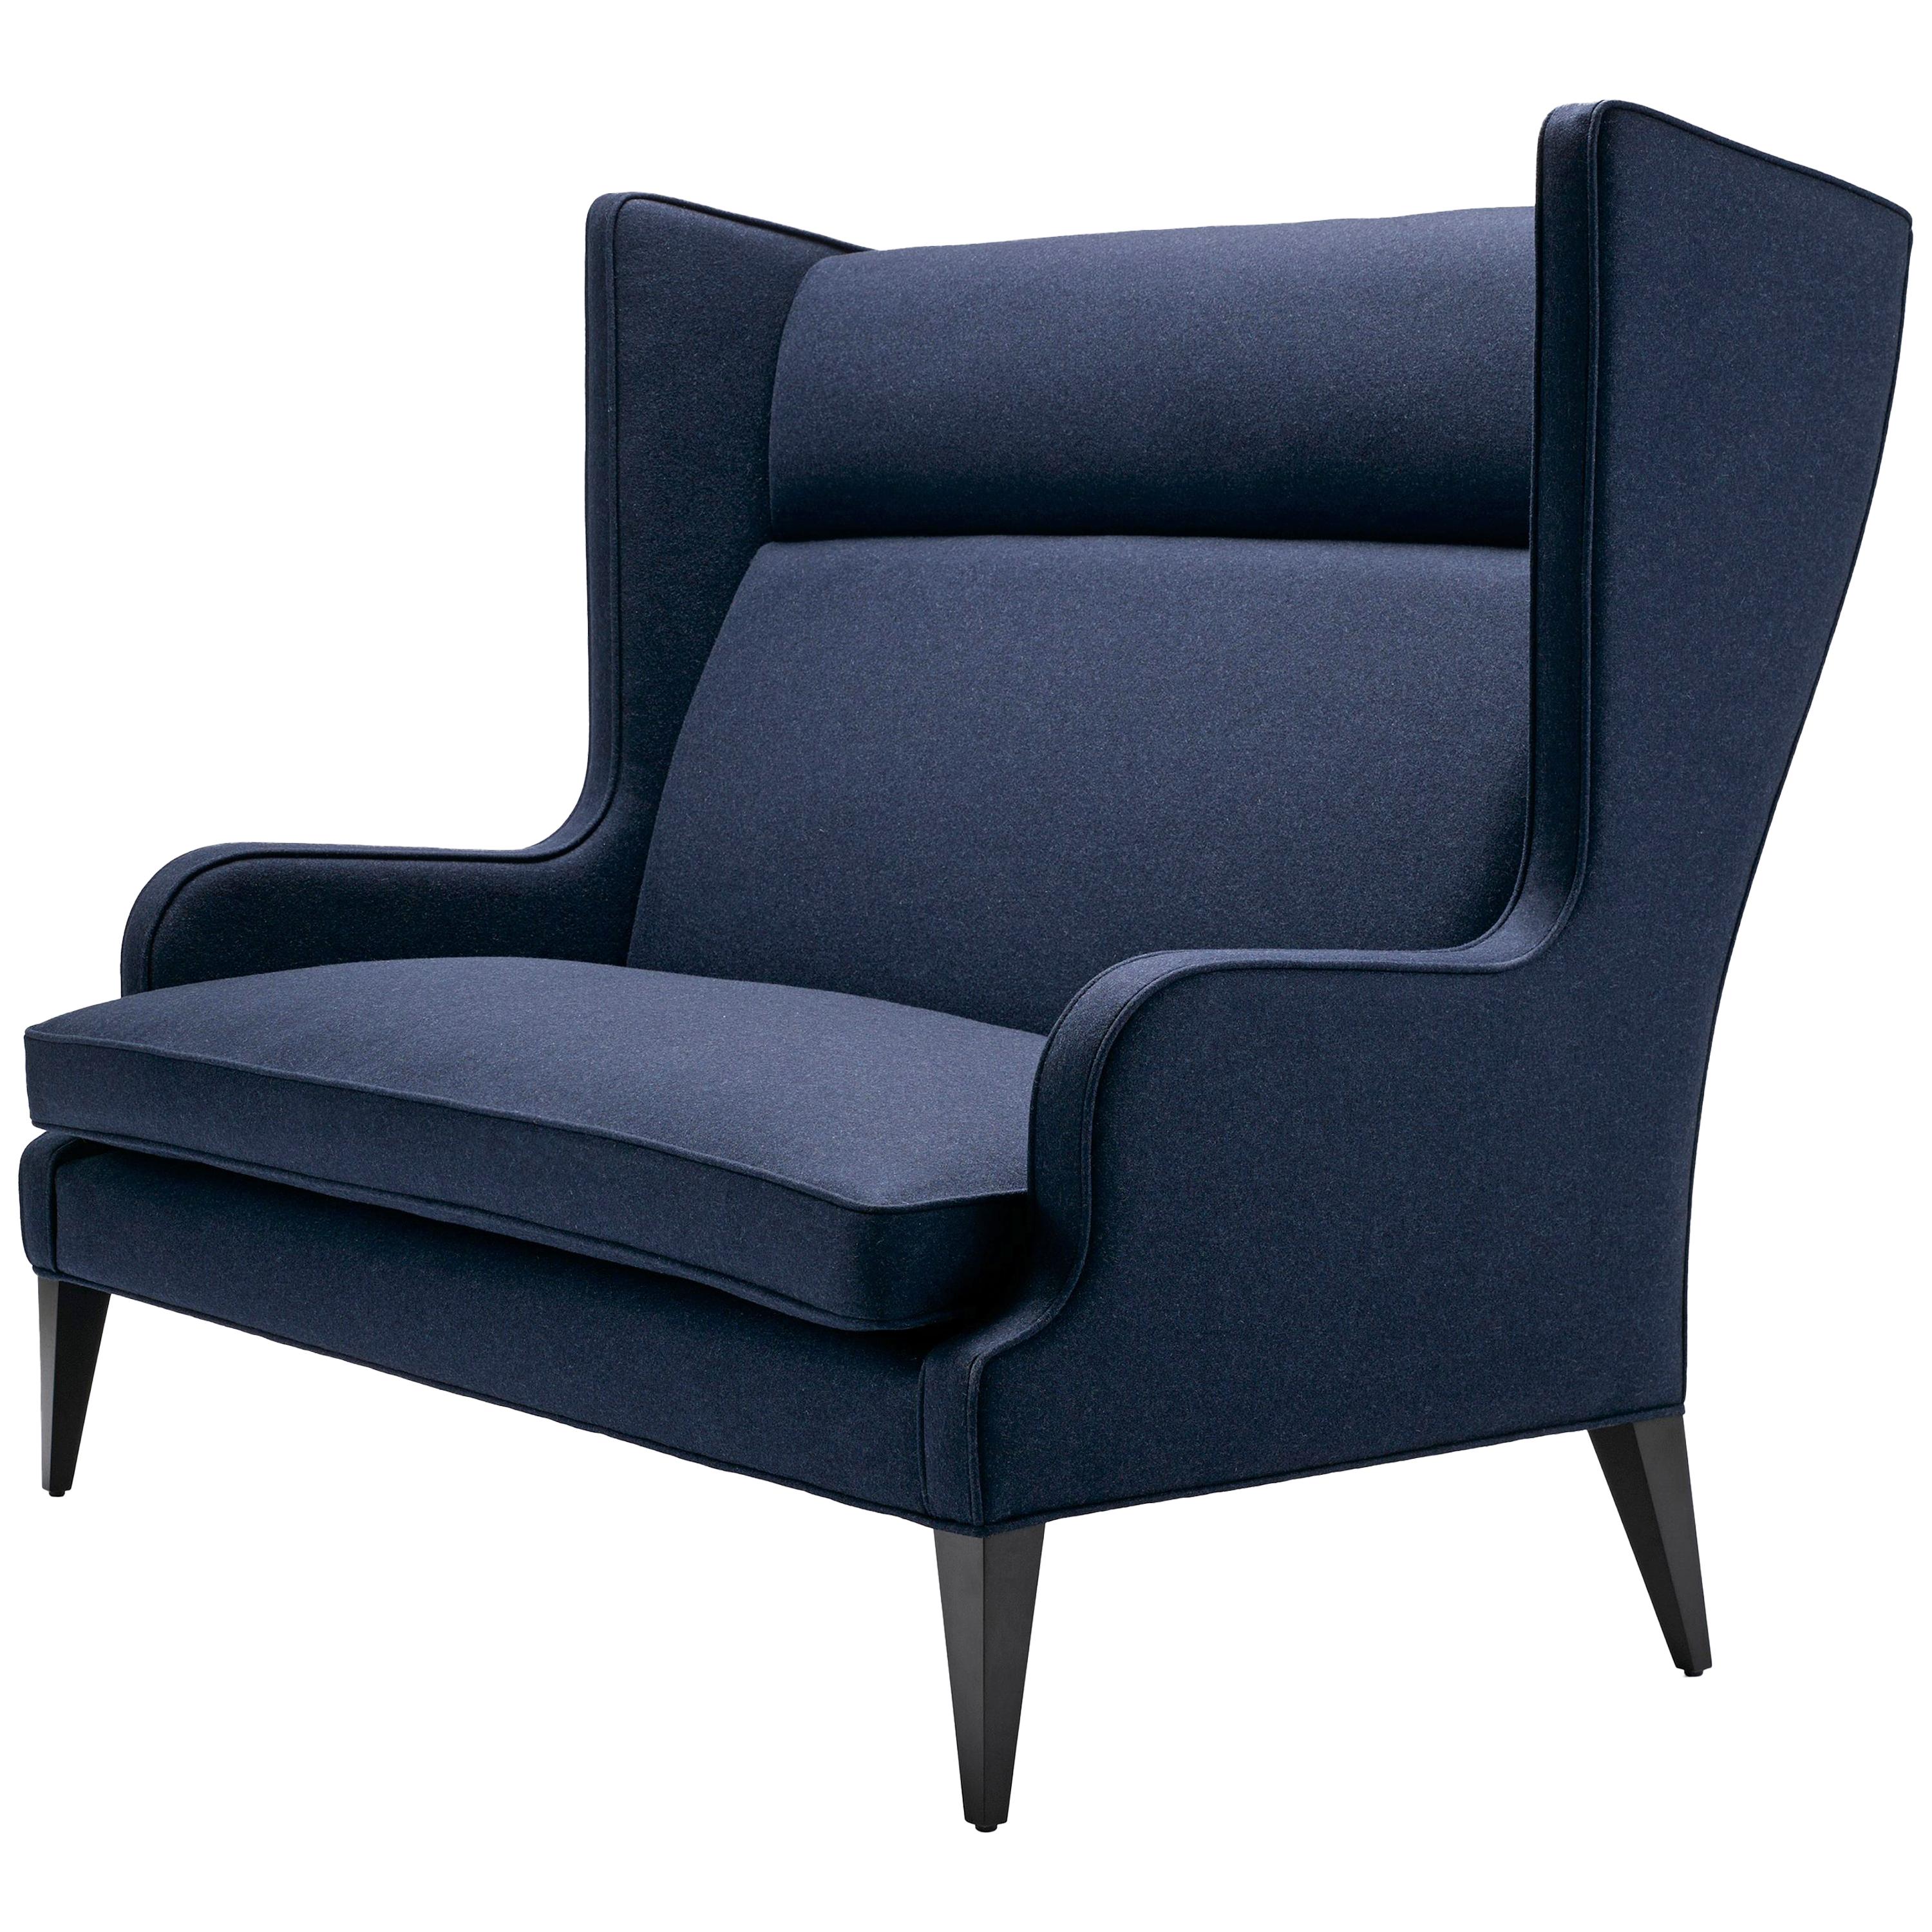 Contemporary Alae Wing Sofa in Navy Melton Wool with Black Walnut Legs